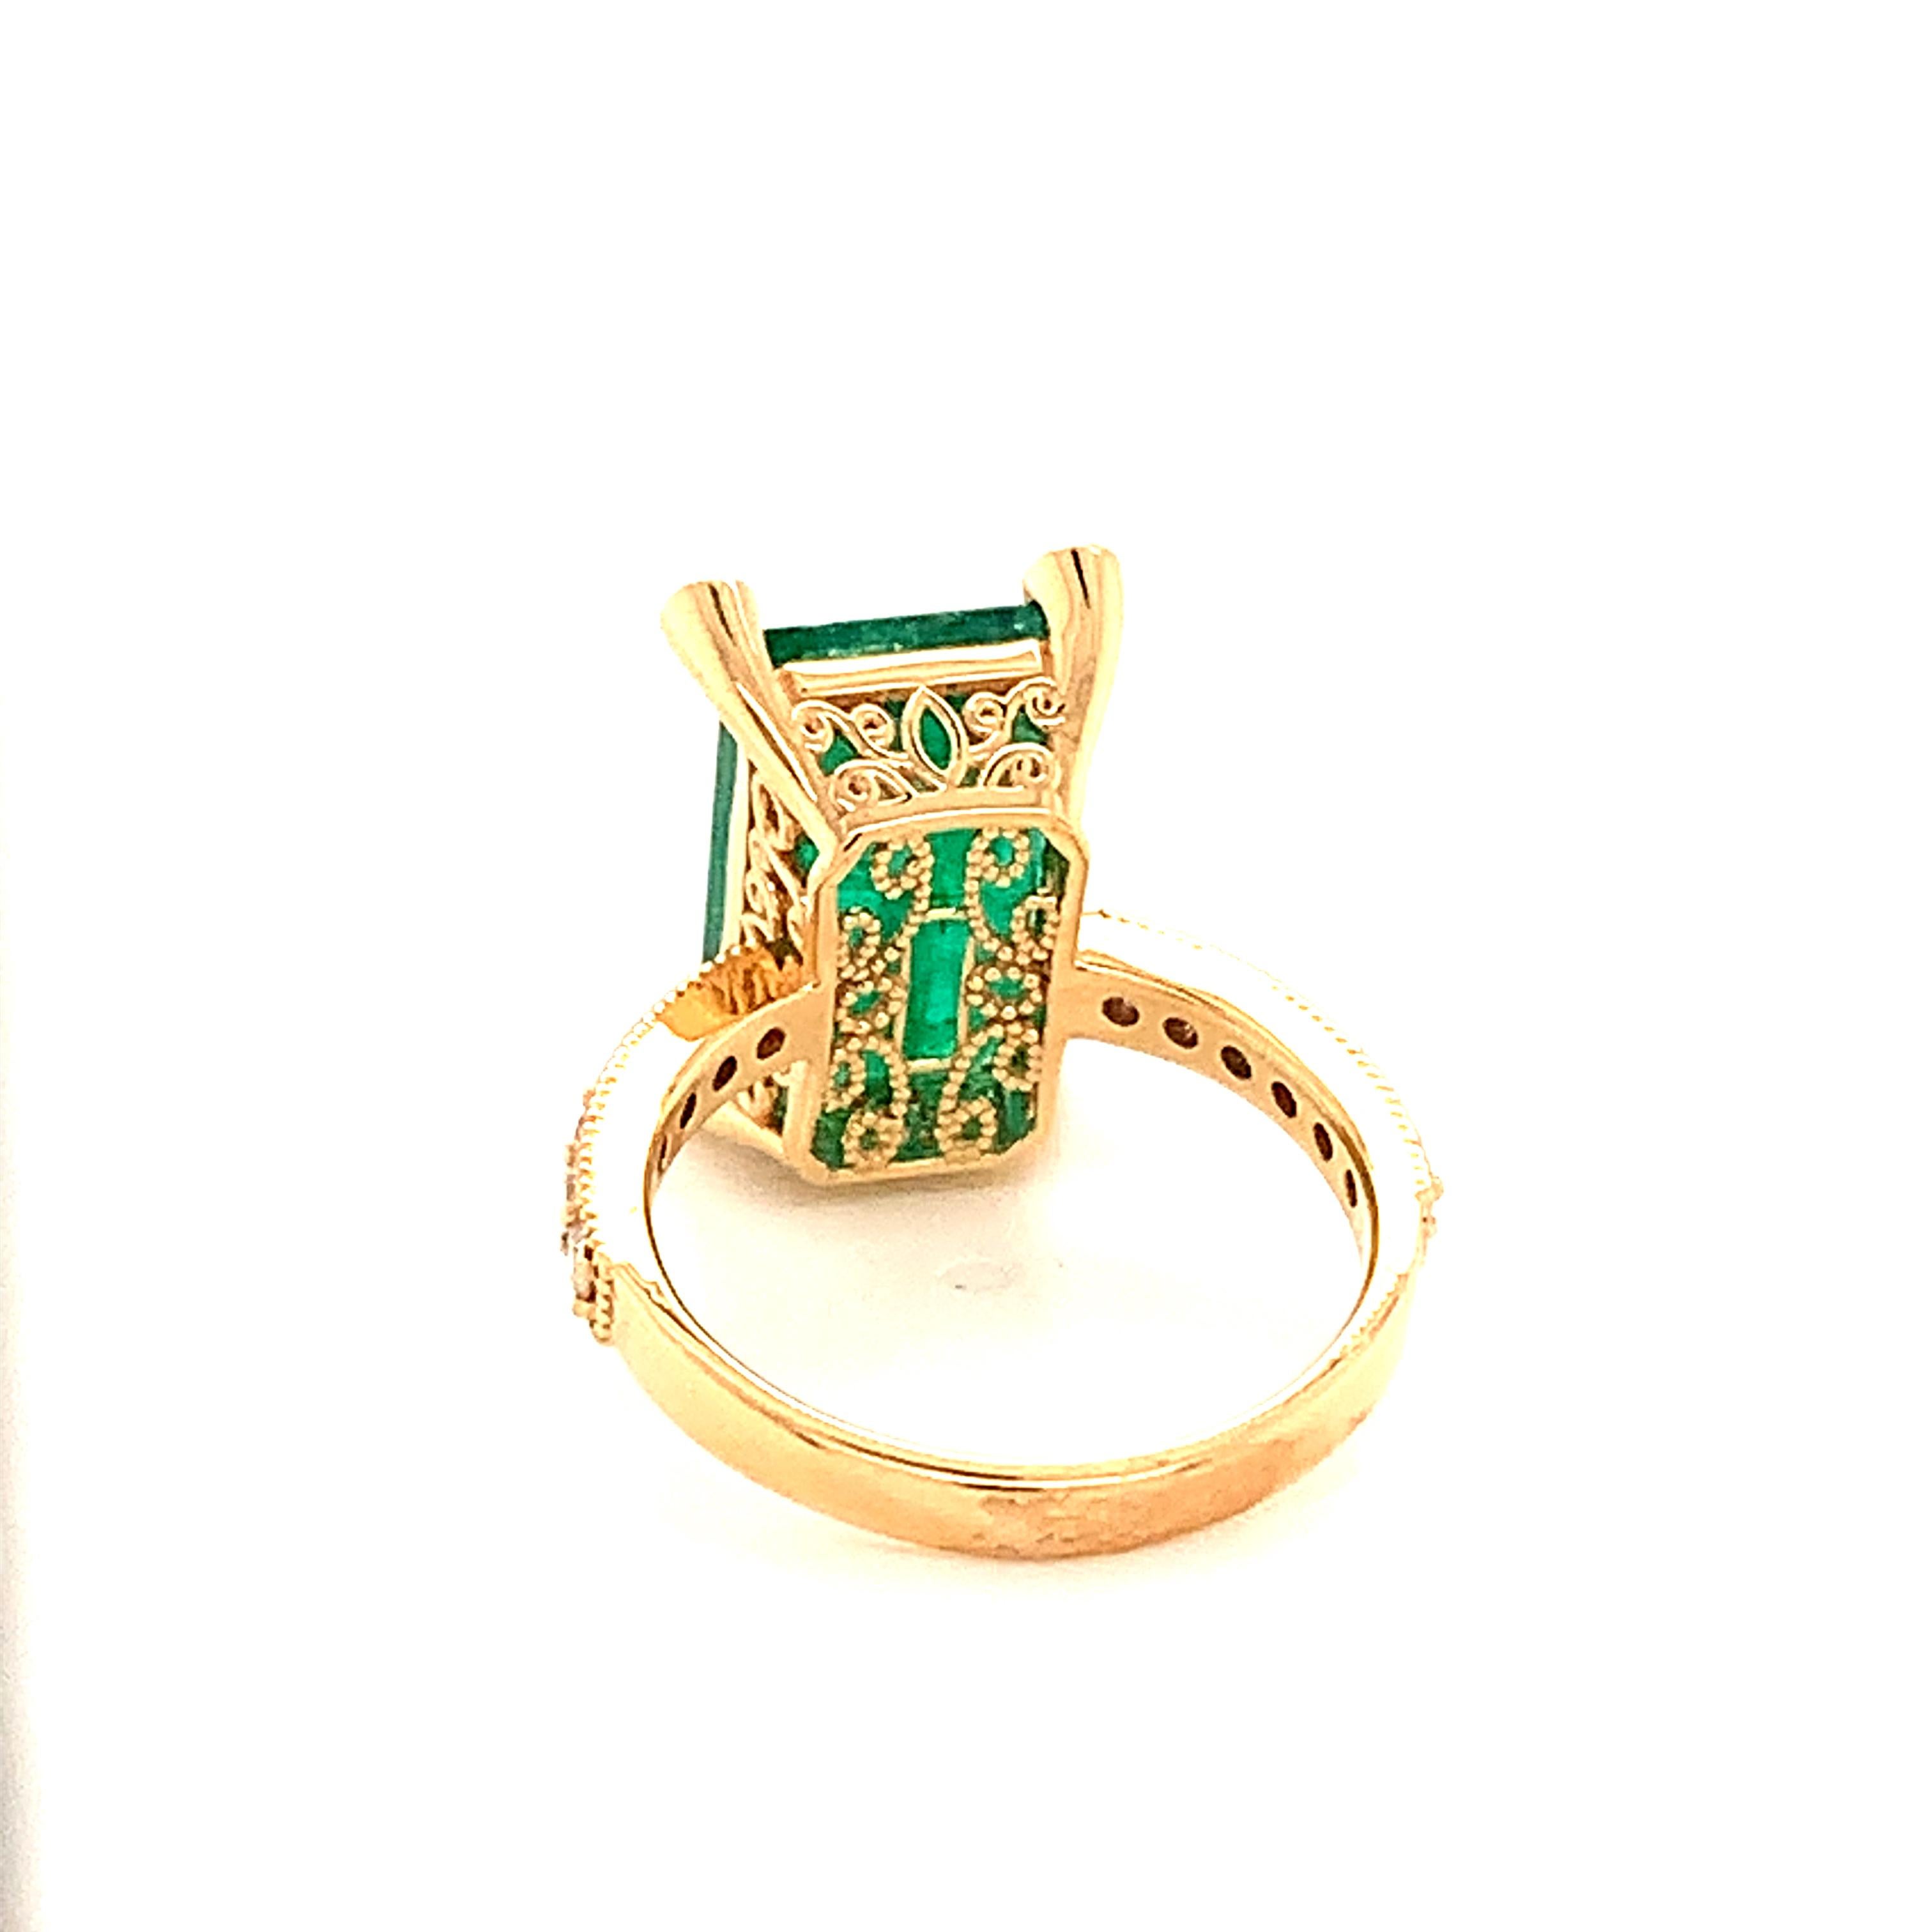 Natural Emerald Diamond Ring 14k Gold 4.37 TCW GIA Certified For Sale 3